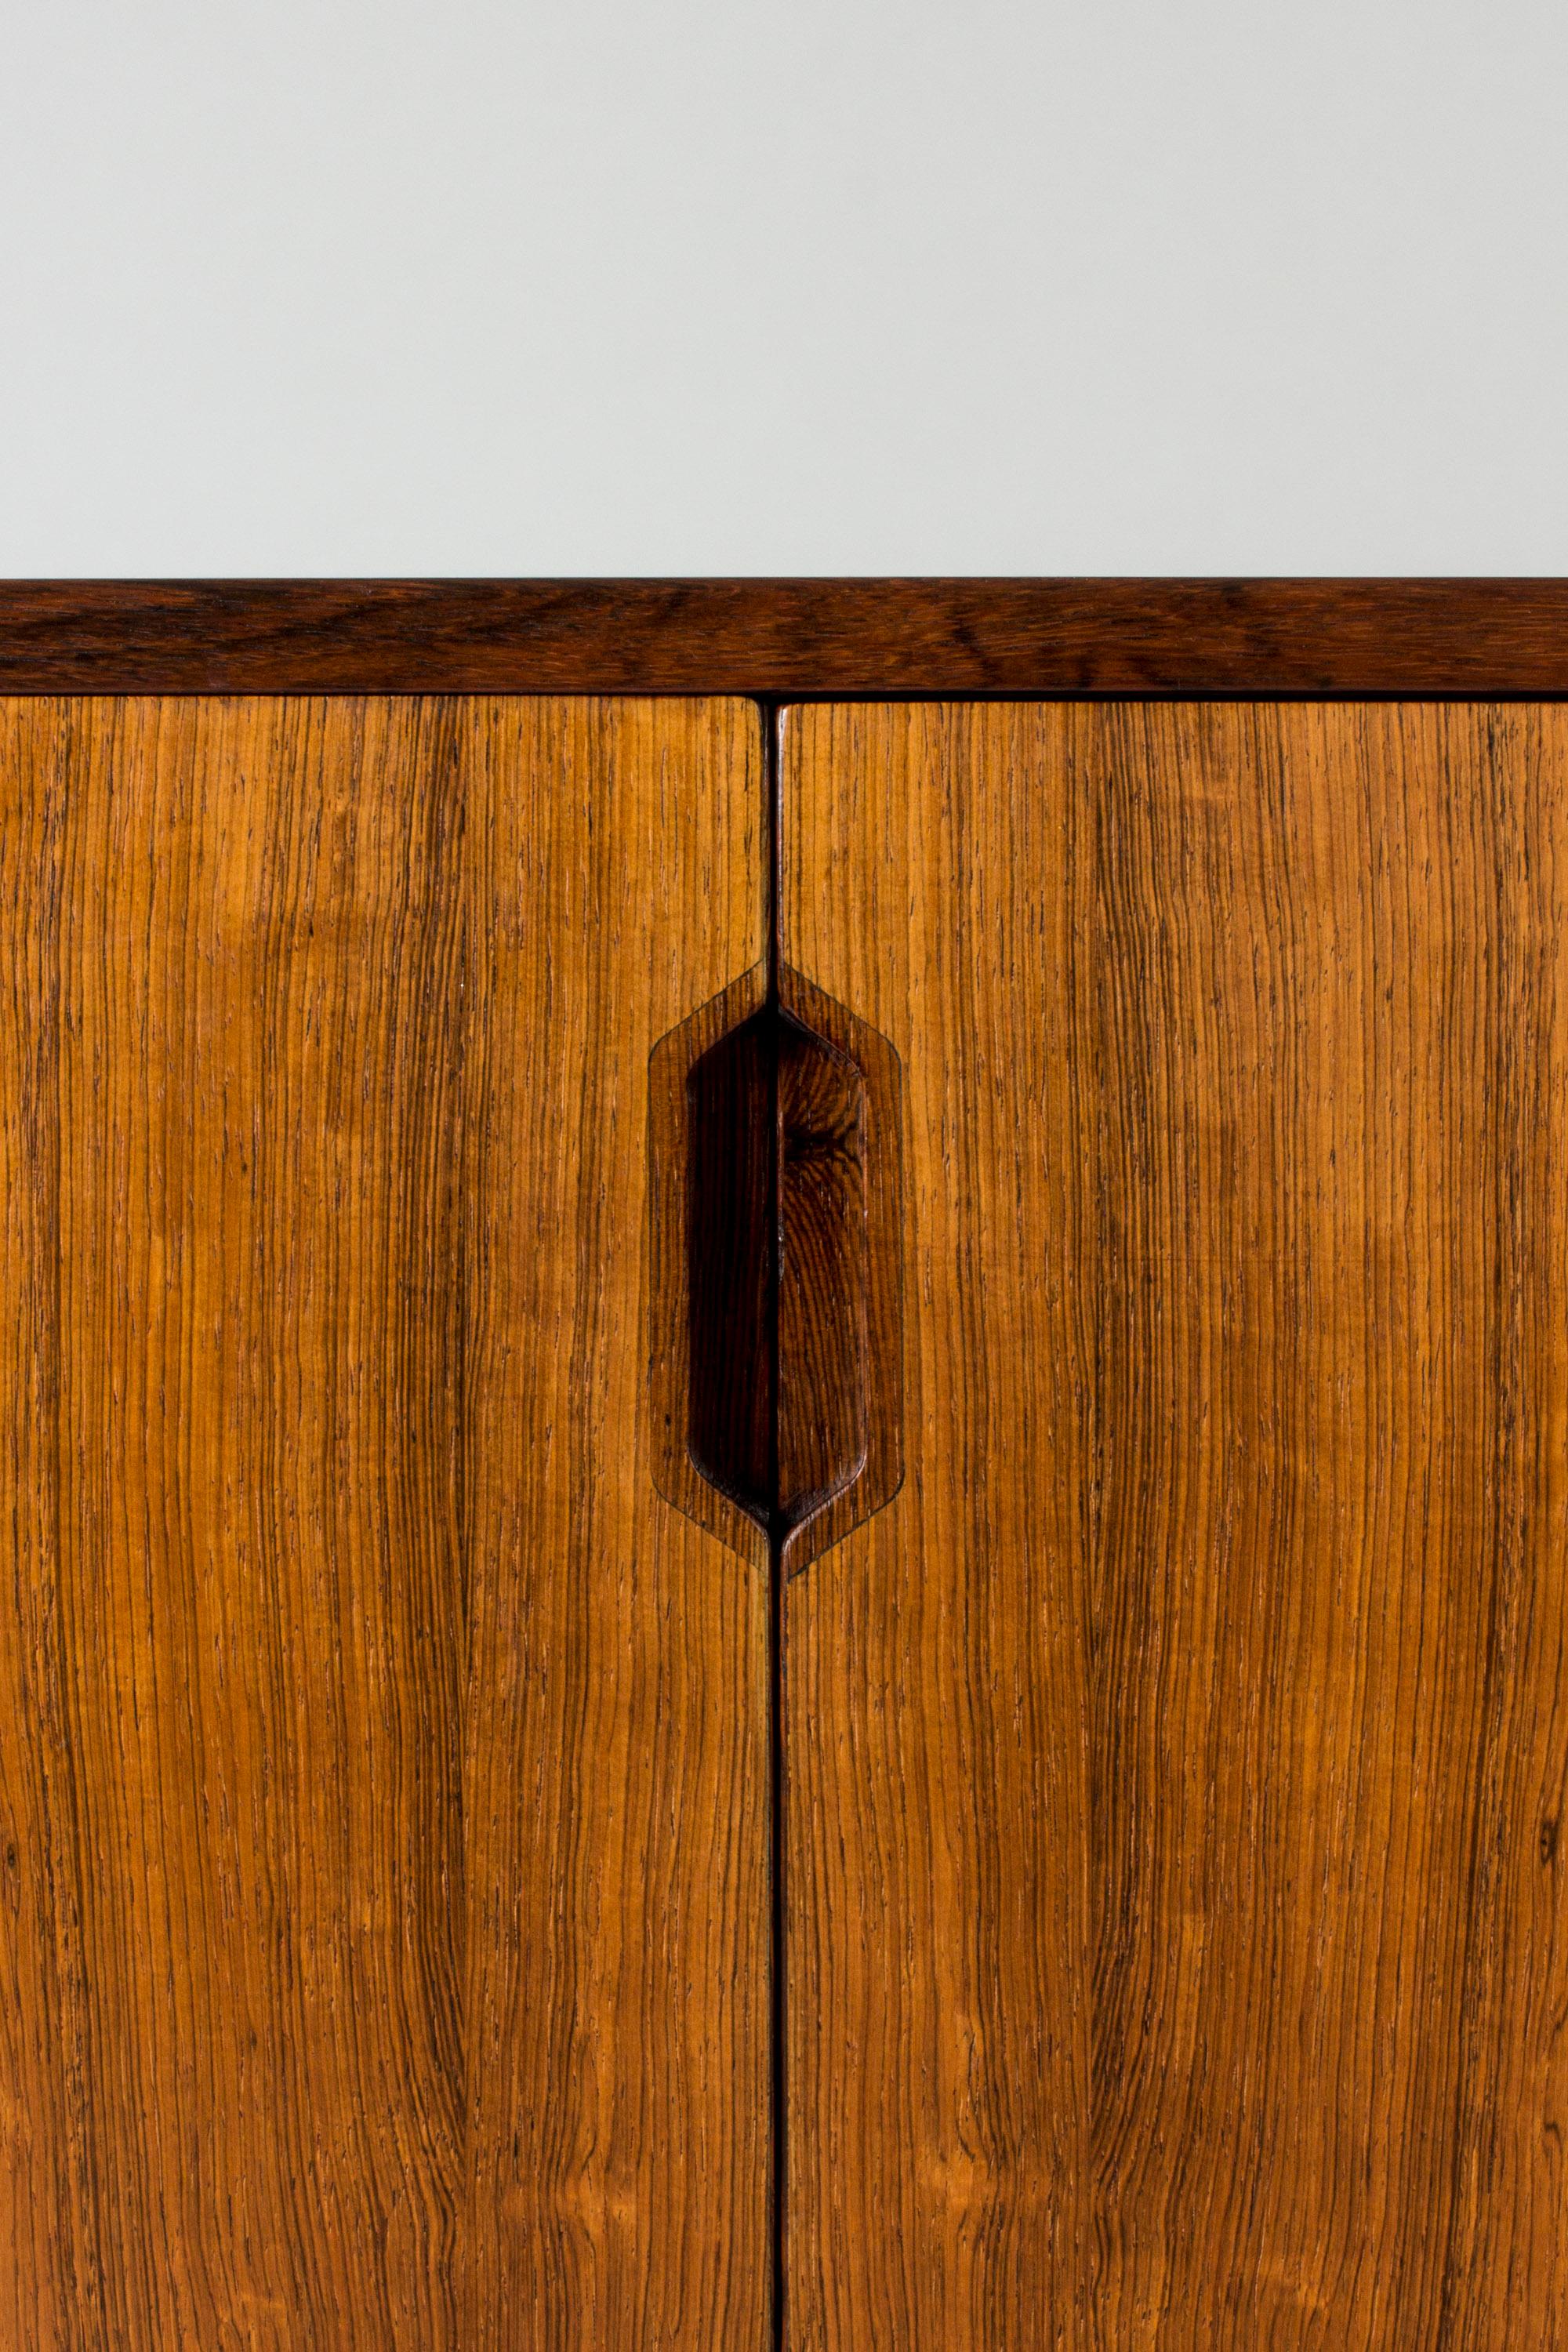 Danish Midcentury Rosewood and Brass Sideboard by Svend Langkilde, 1960s For Sale 4